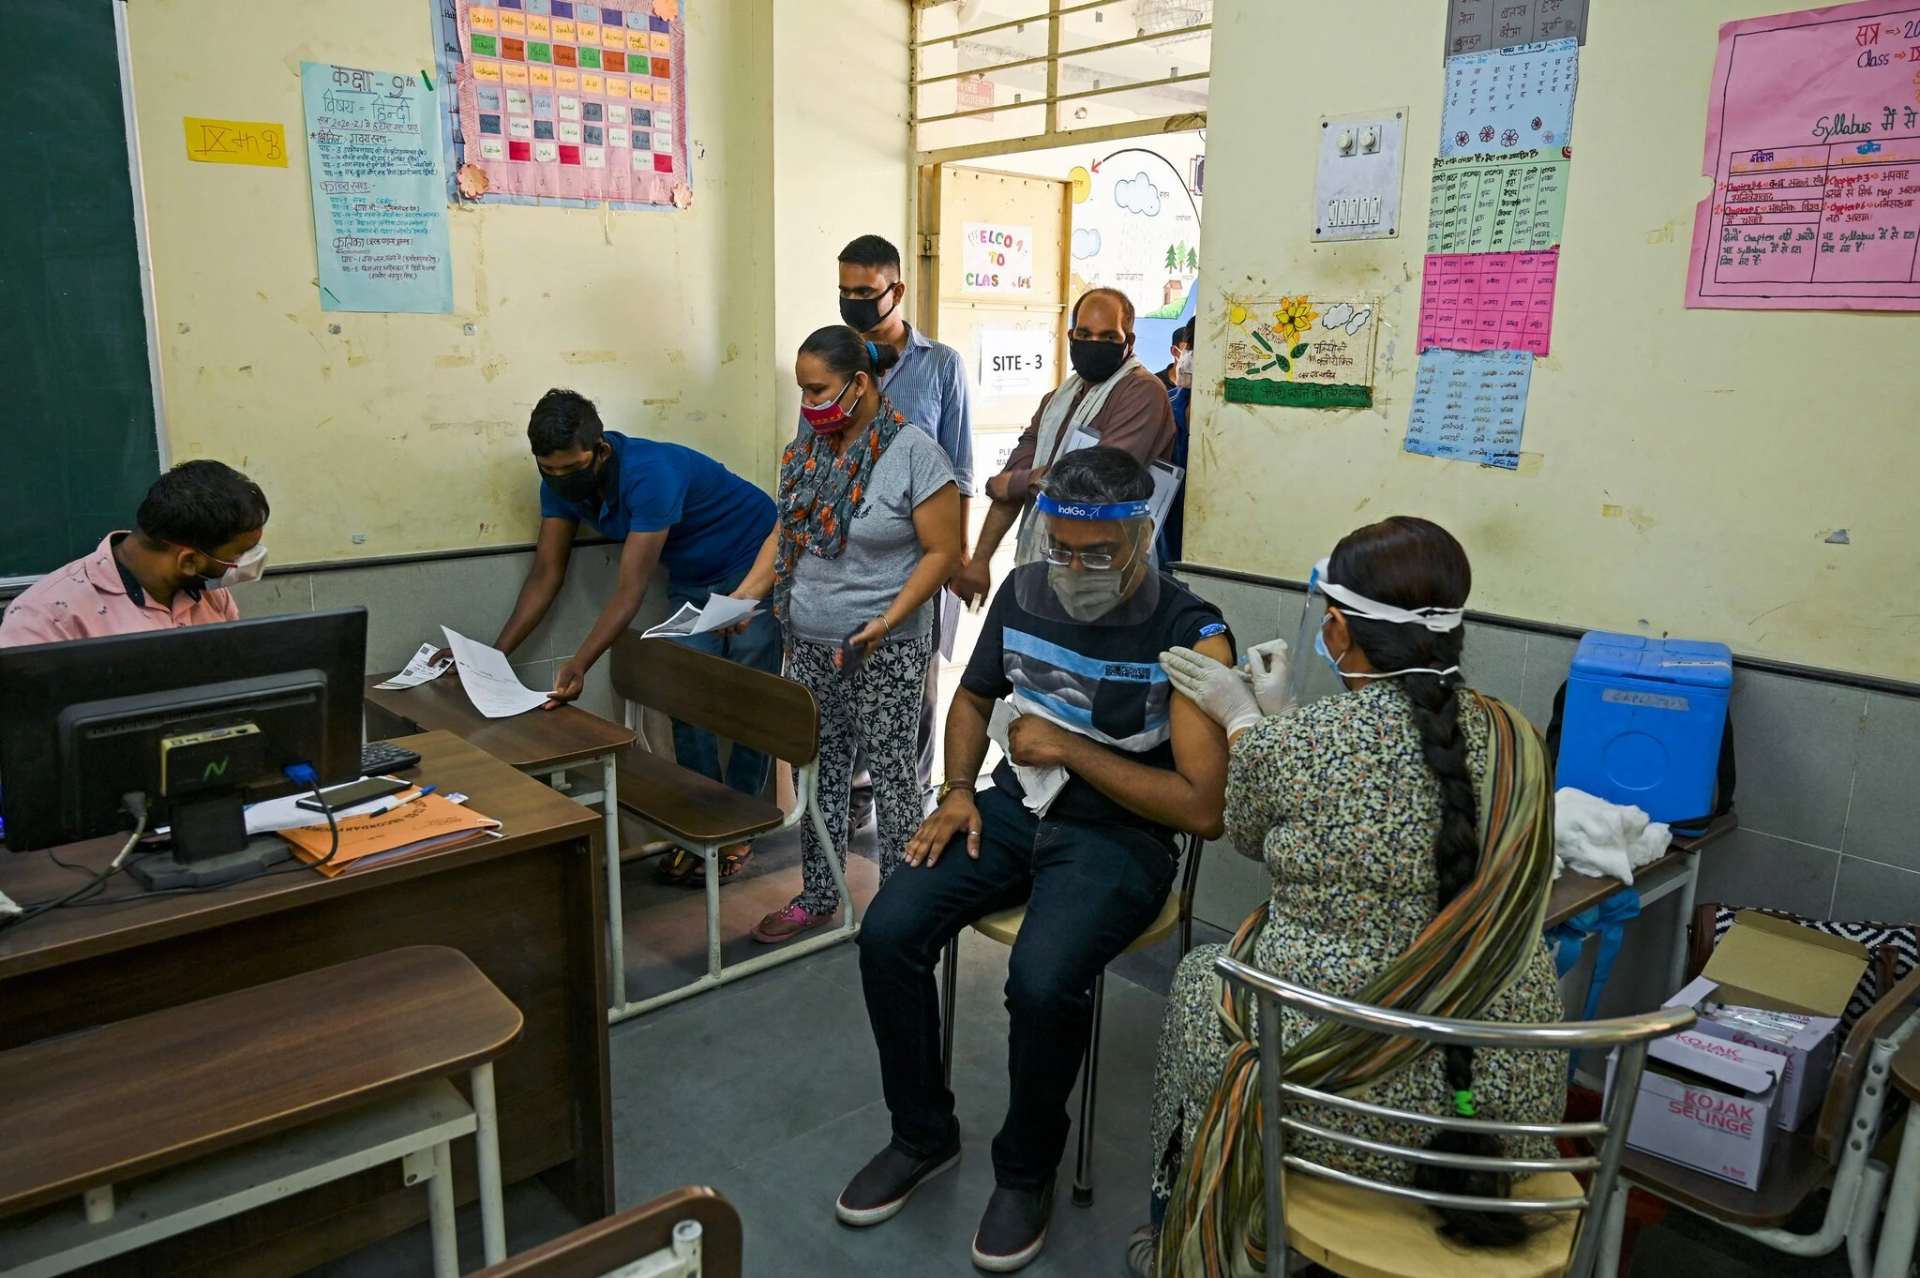 A vaccination center at a school in New Delhi on Wednesday. Credit...Tauseef Mustafa/Agence France-Presse — Getty Images